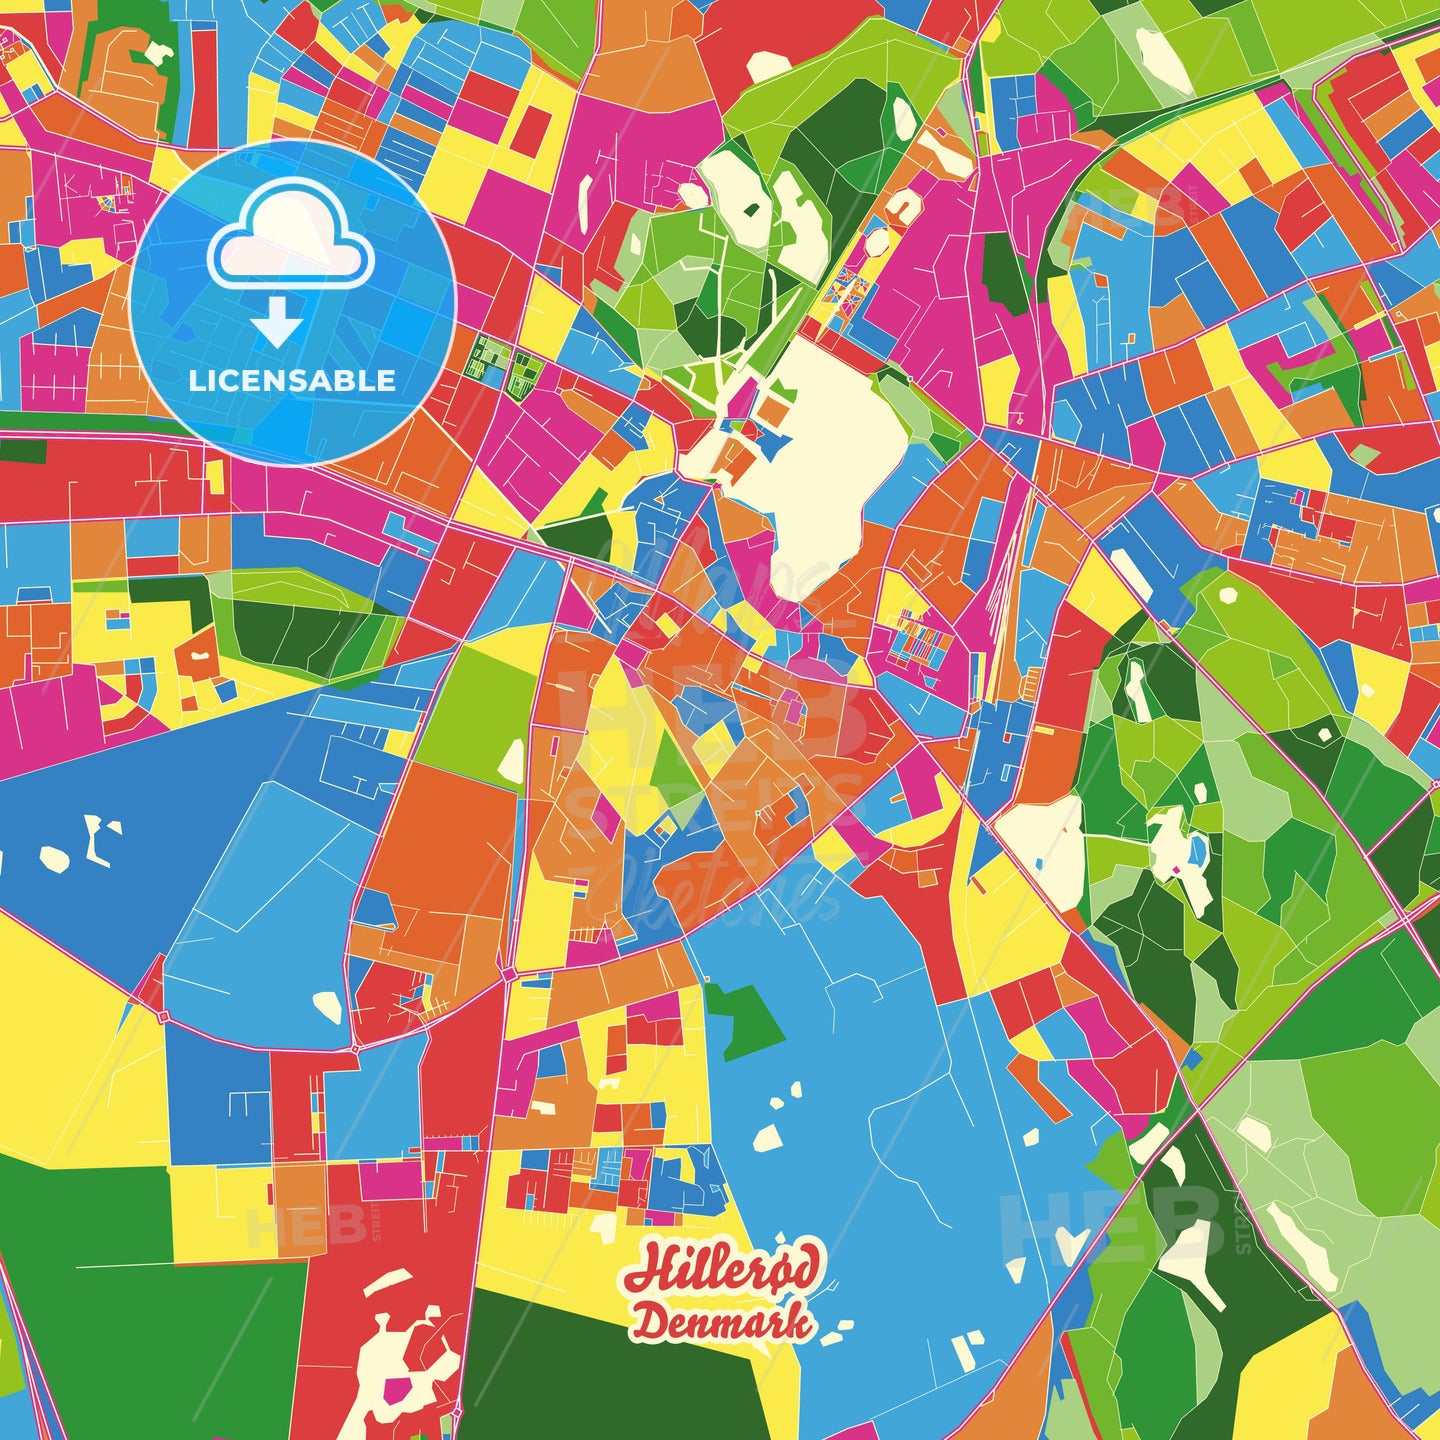 Hillerød, Denmark Crazy Colorful Street Map Poster Template - HEBSTREITS Sketches